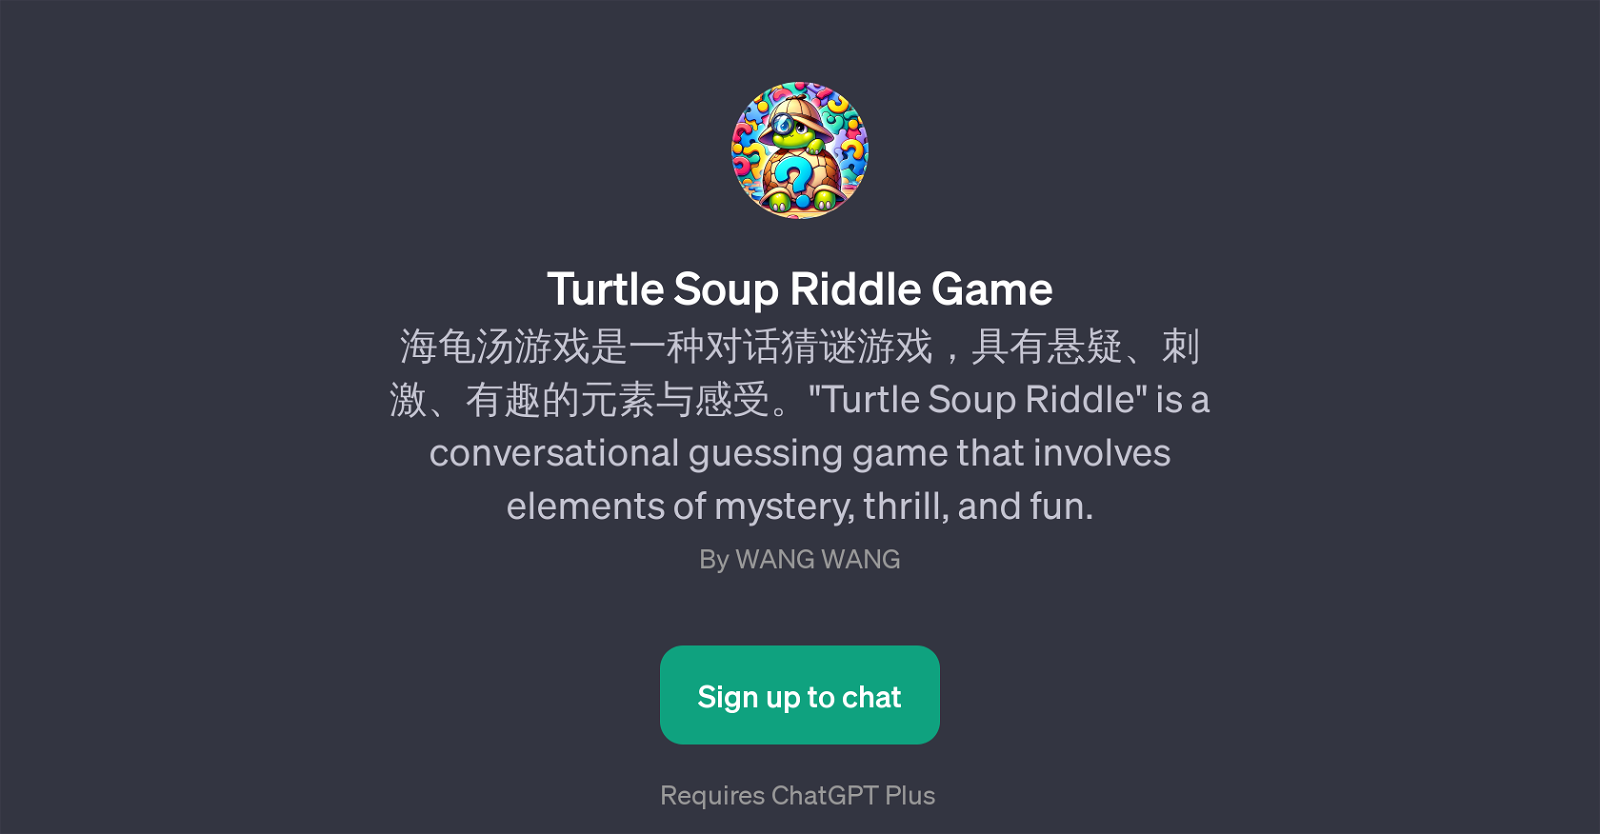 Turtle Soup Riddle Game website